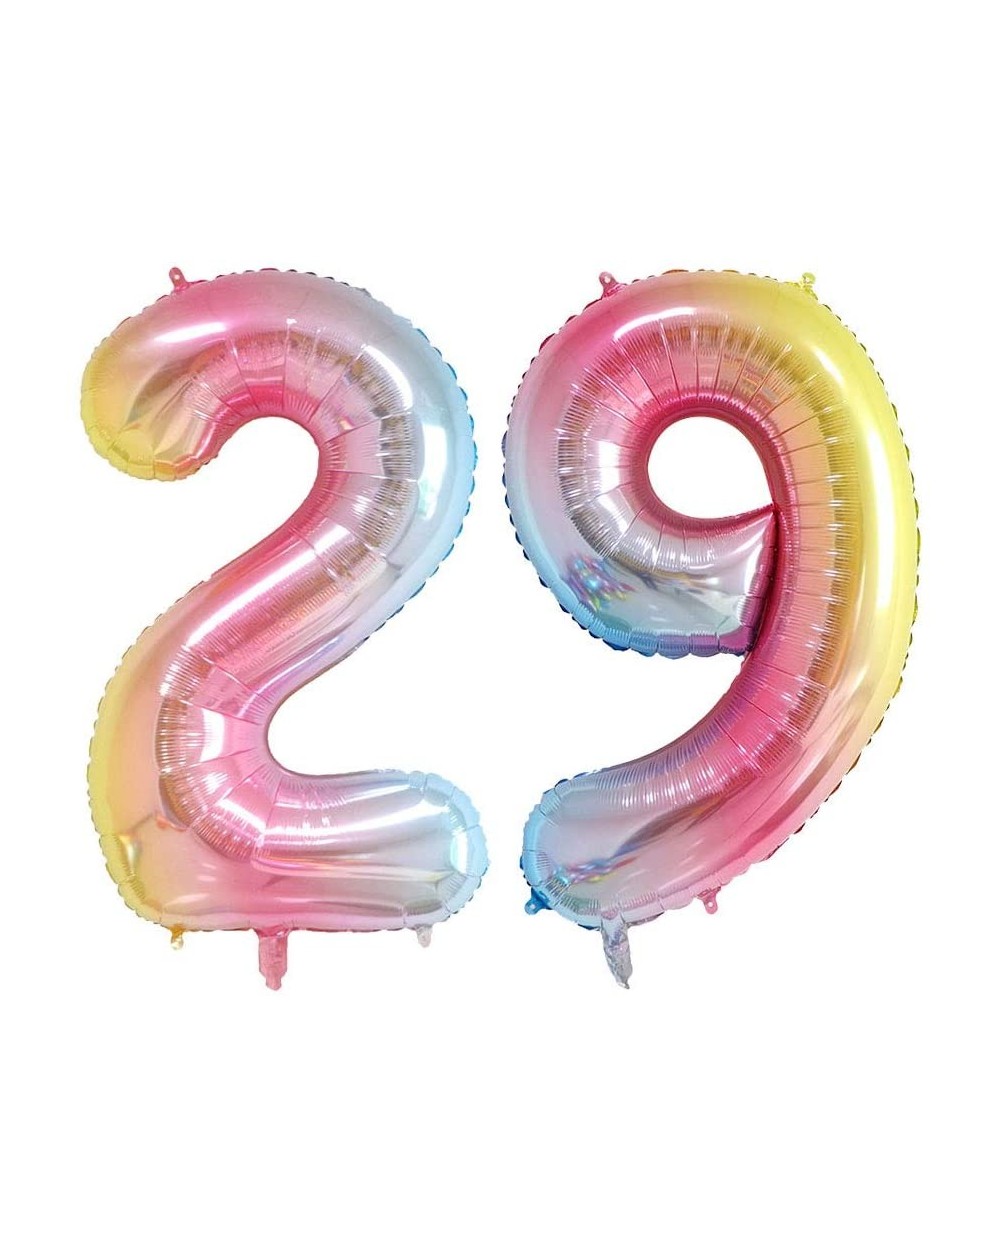 Balloons Number 29 Rainbow Foil Jumbo Digital Mylar Balloons- 40inch 29th Birthday Party Decorations- Colorful Party Balloon ...